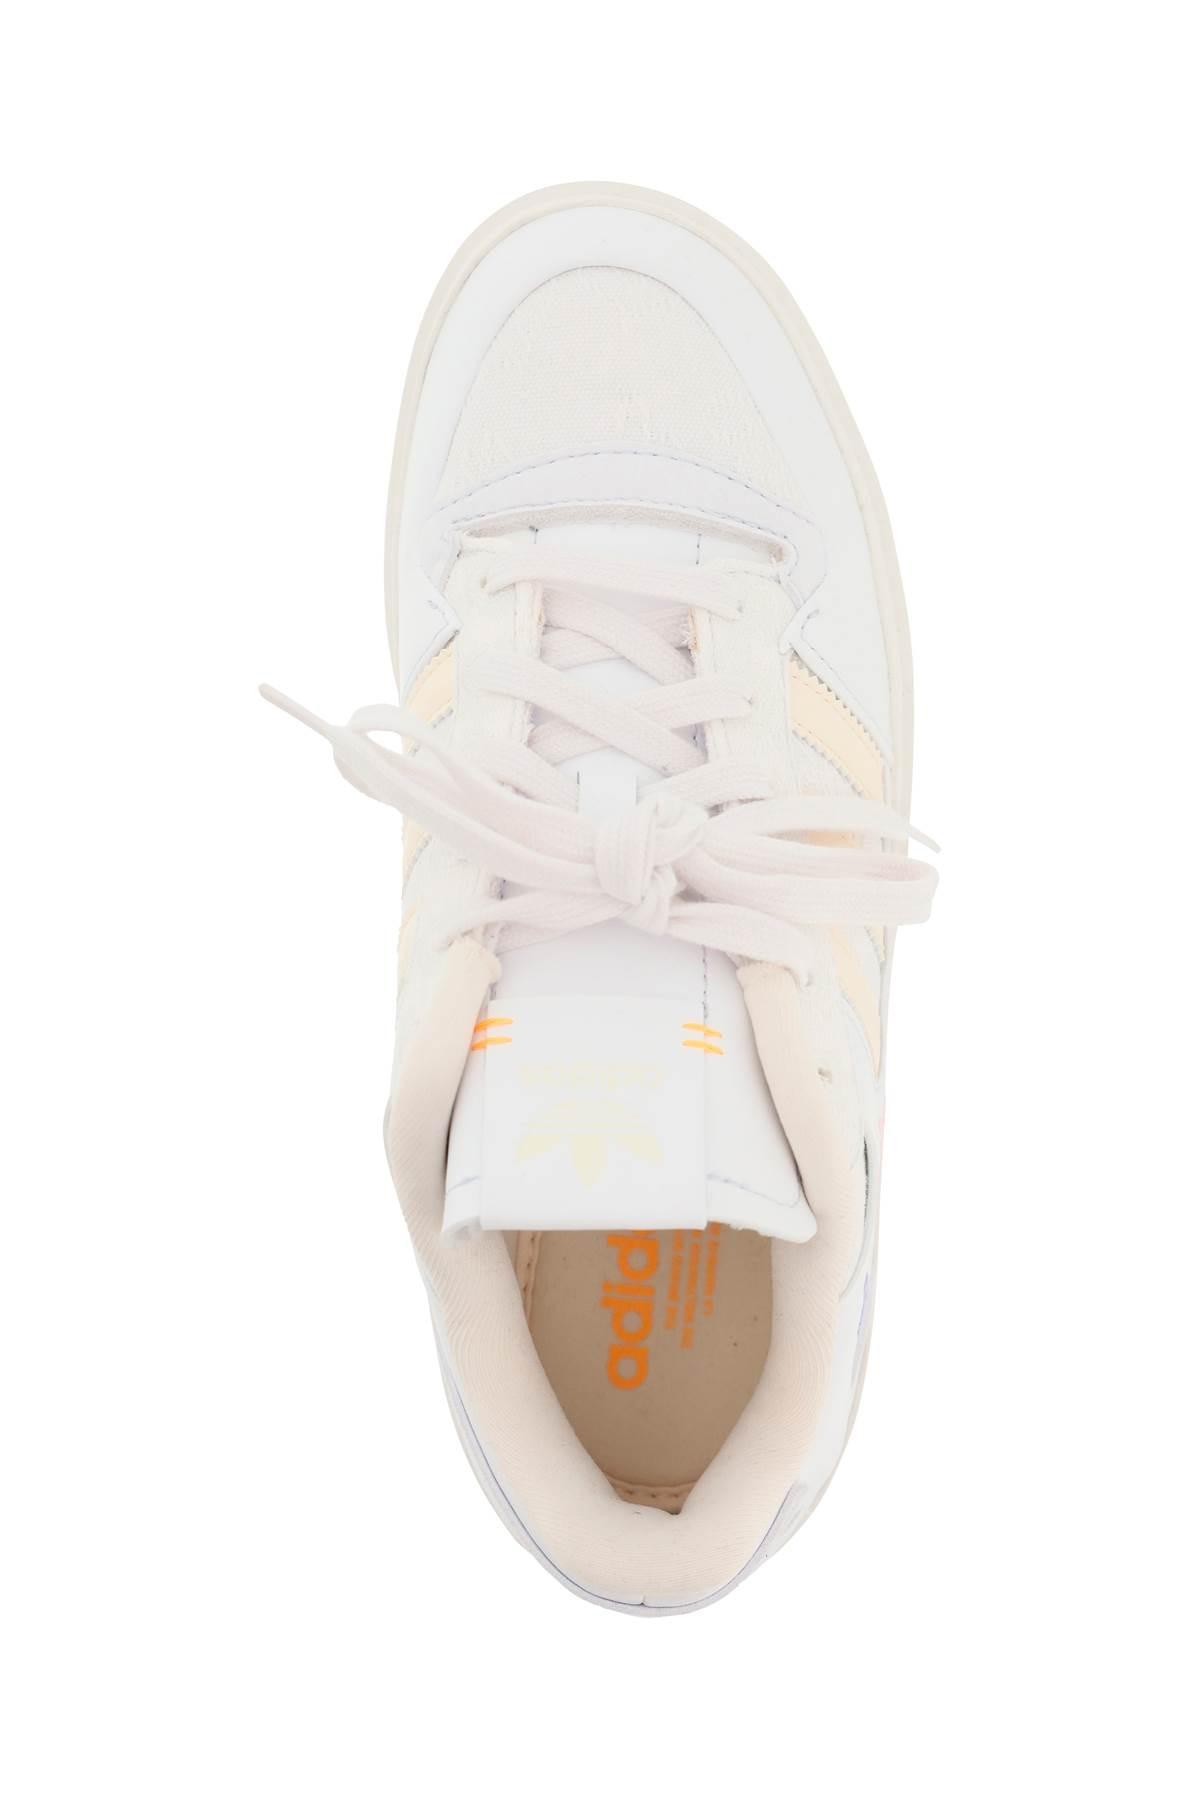 adidas Leather Forum Bonega Sneakers in White - Save 23% | Lyst Canada